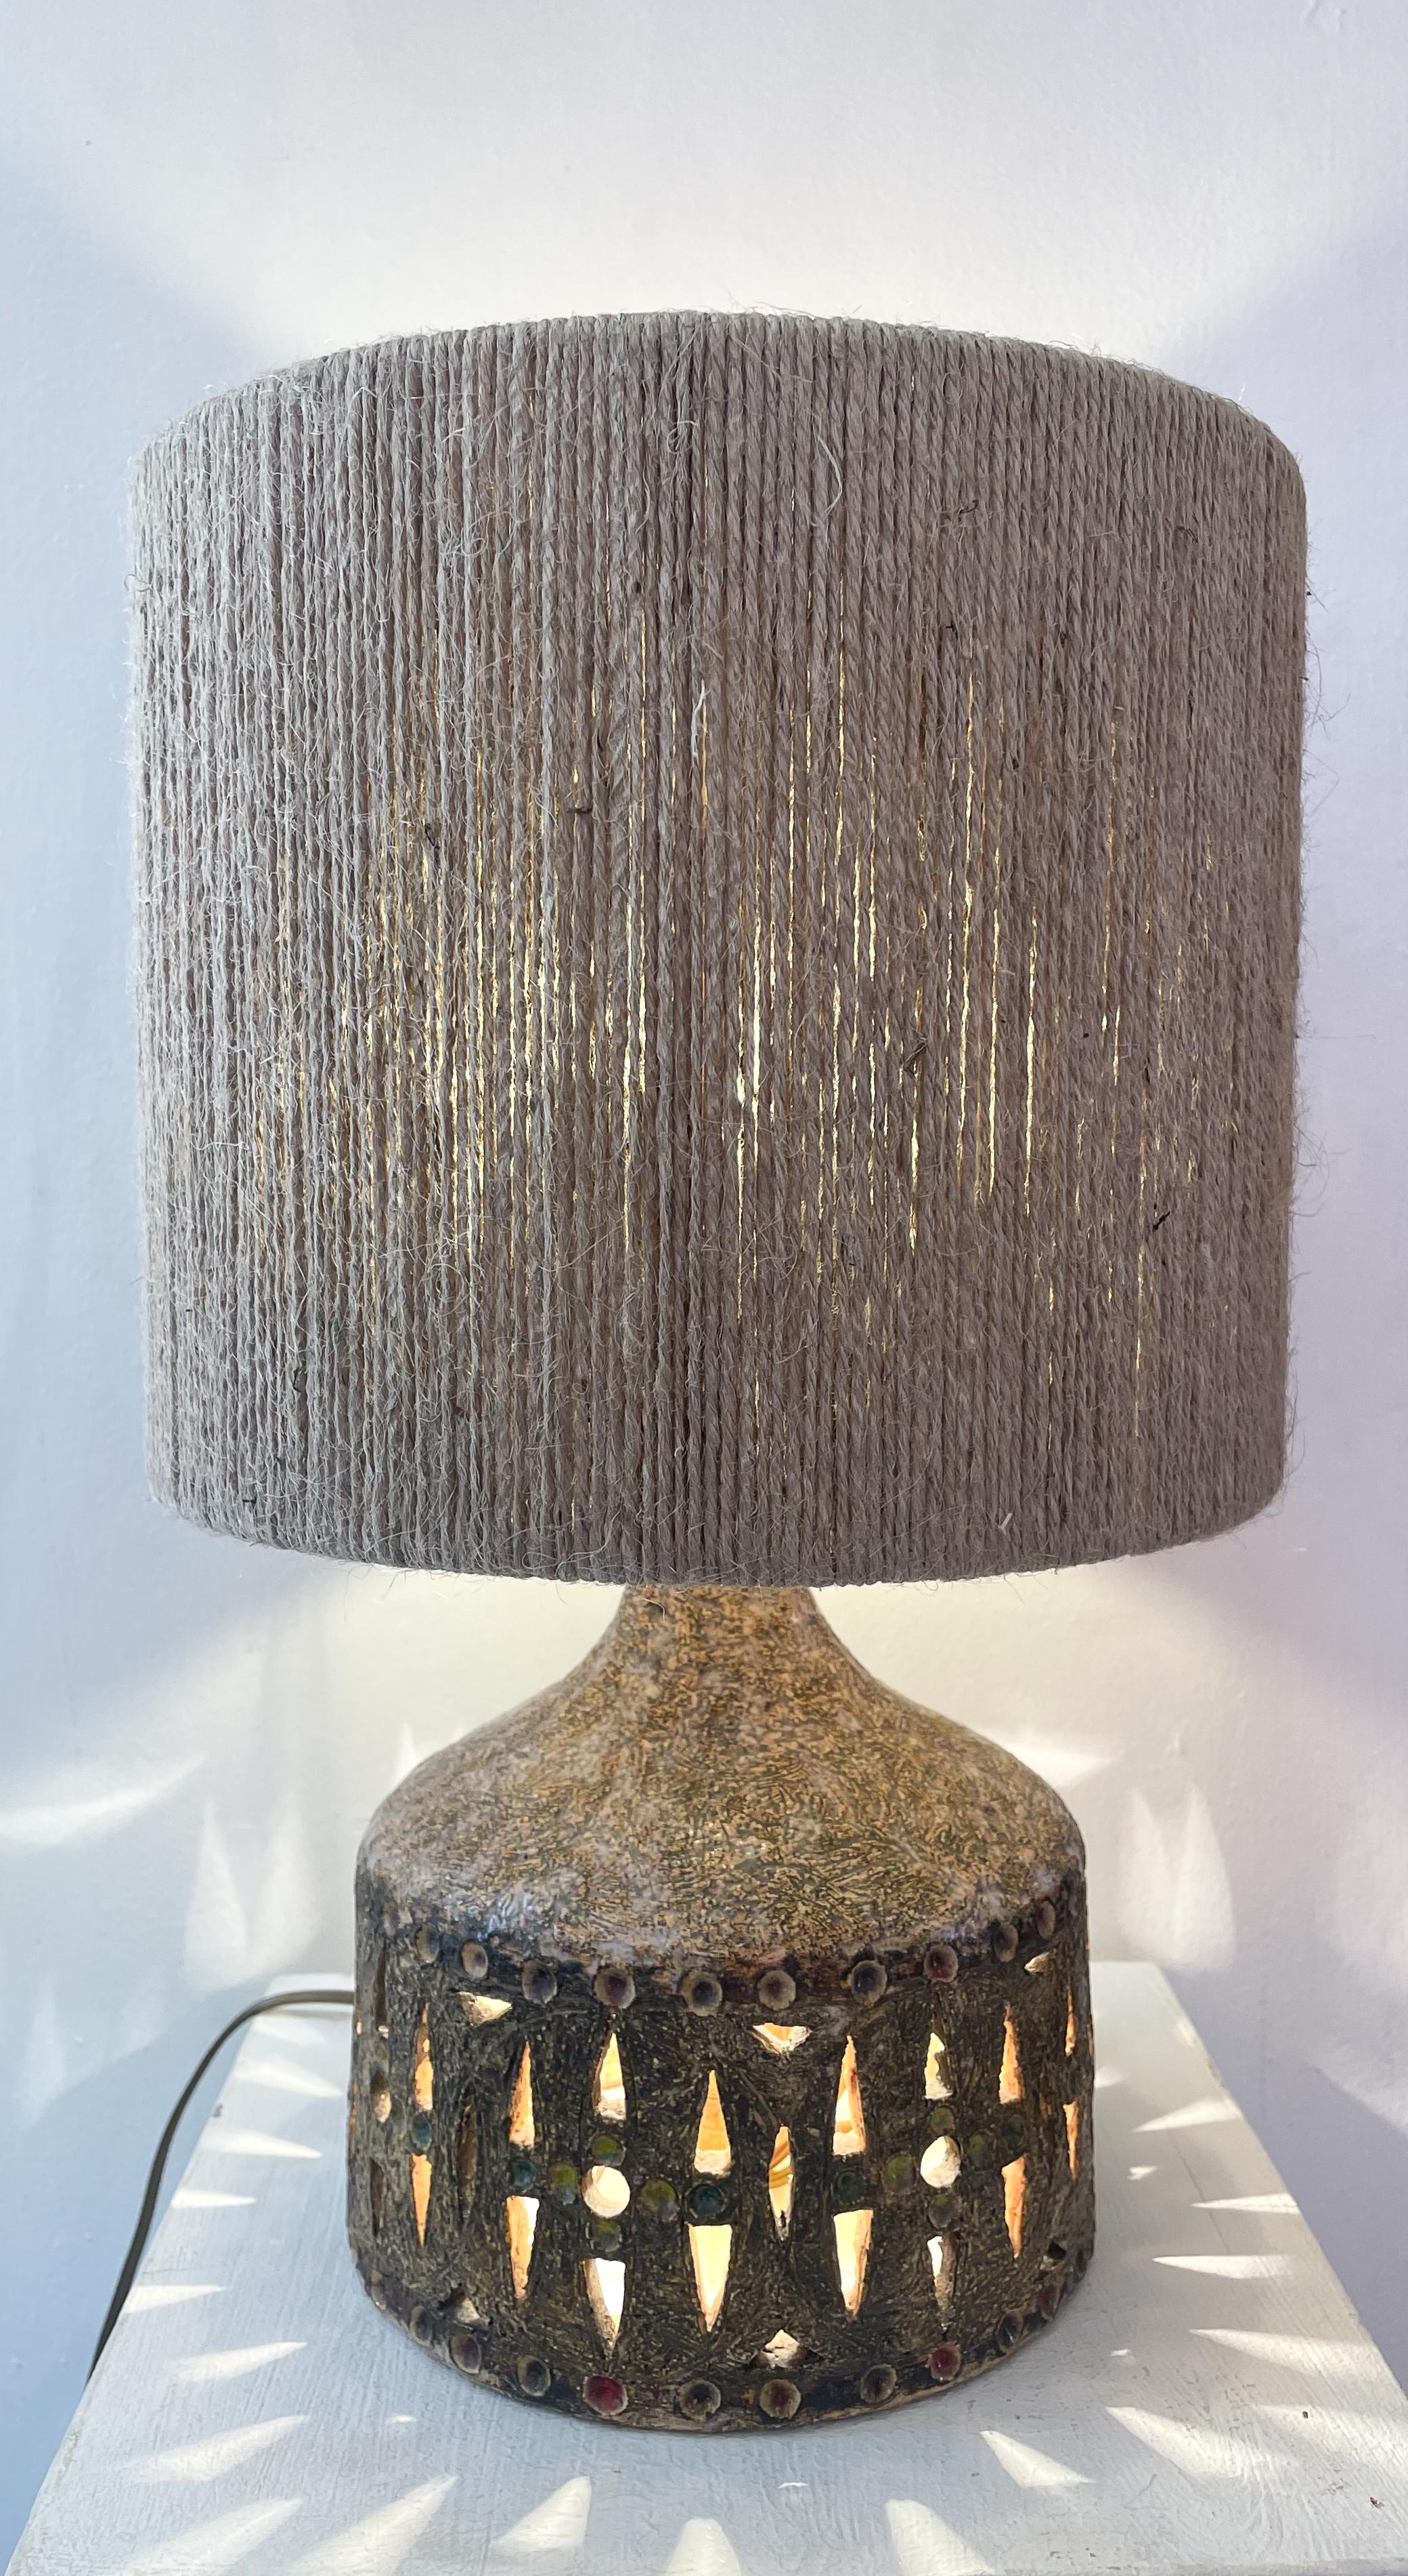 Mid-Century Modern Ceramic Table Lamp in the style of Georges Pelletier, 1960s For Sale 3